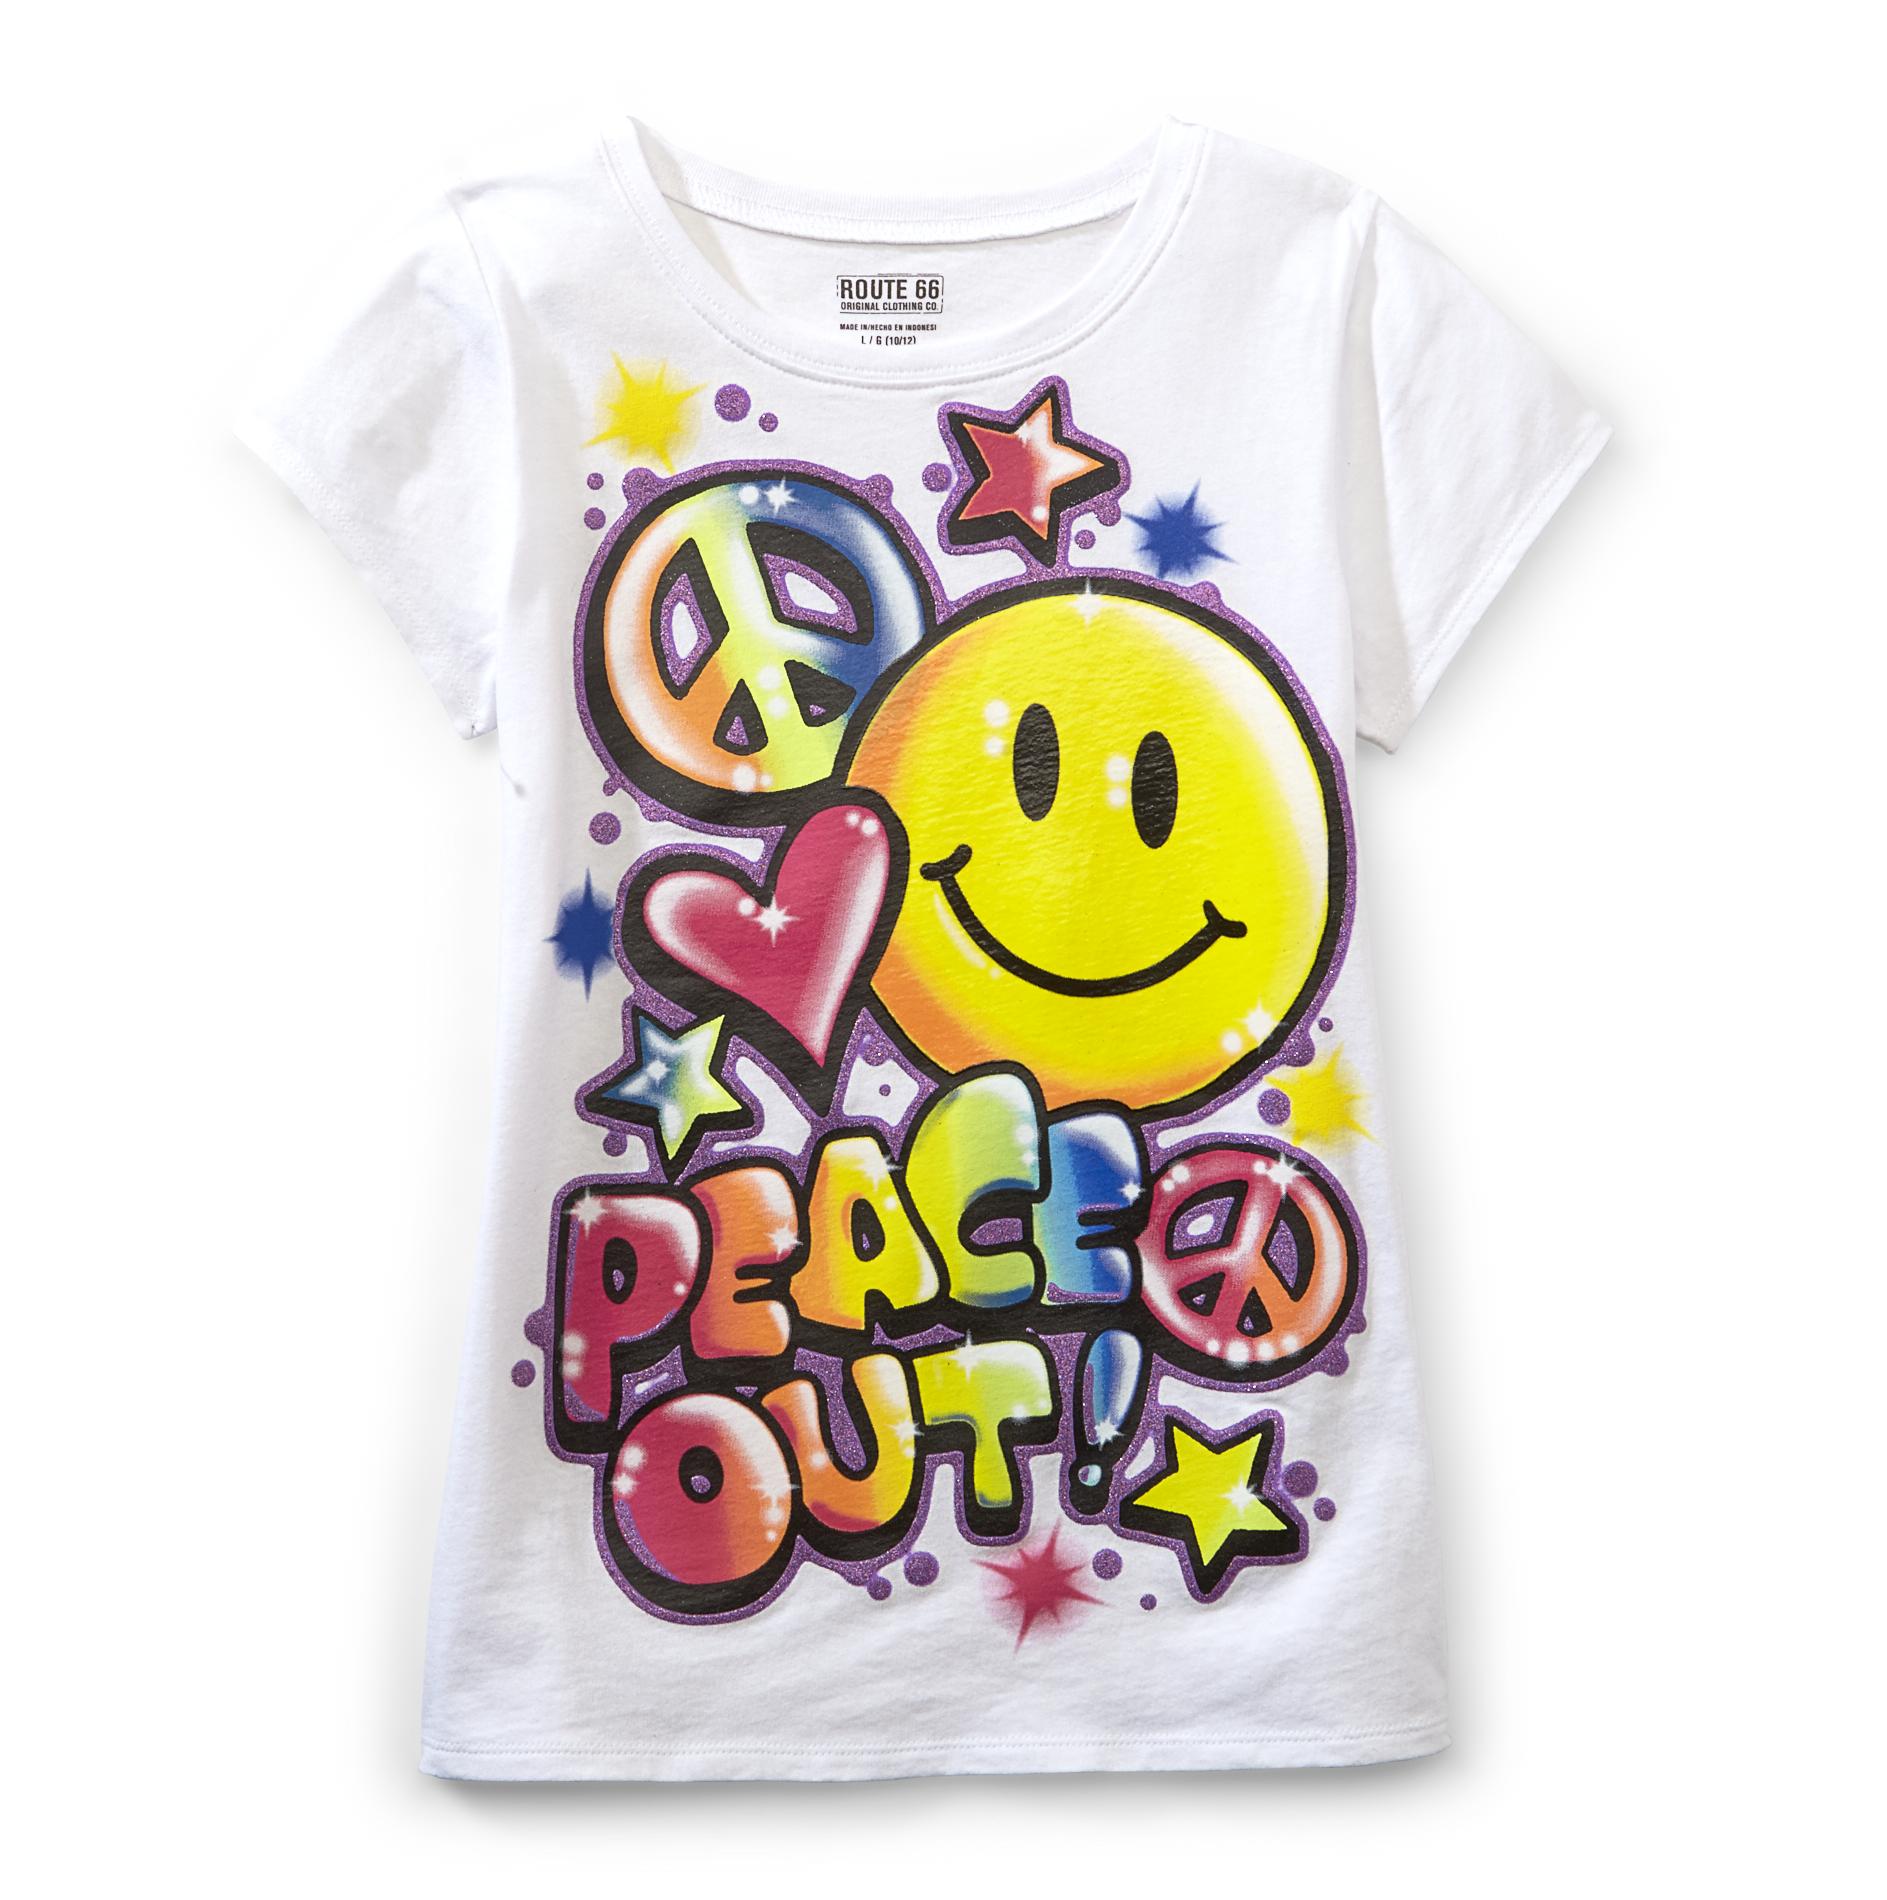 Route 66 Girl's Graphic T-Shirt - Peace Out!